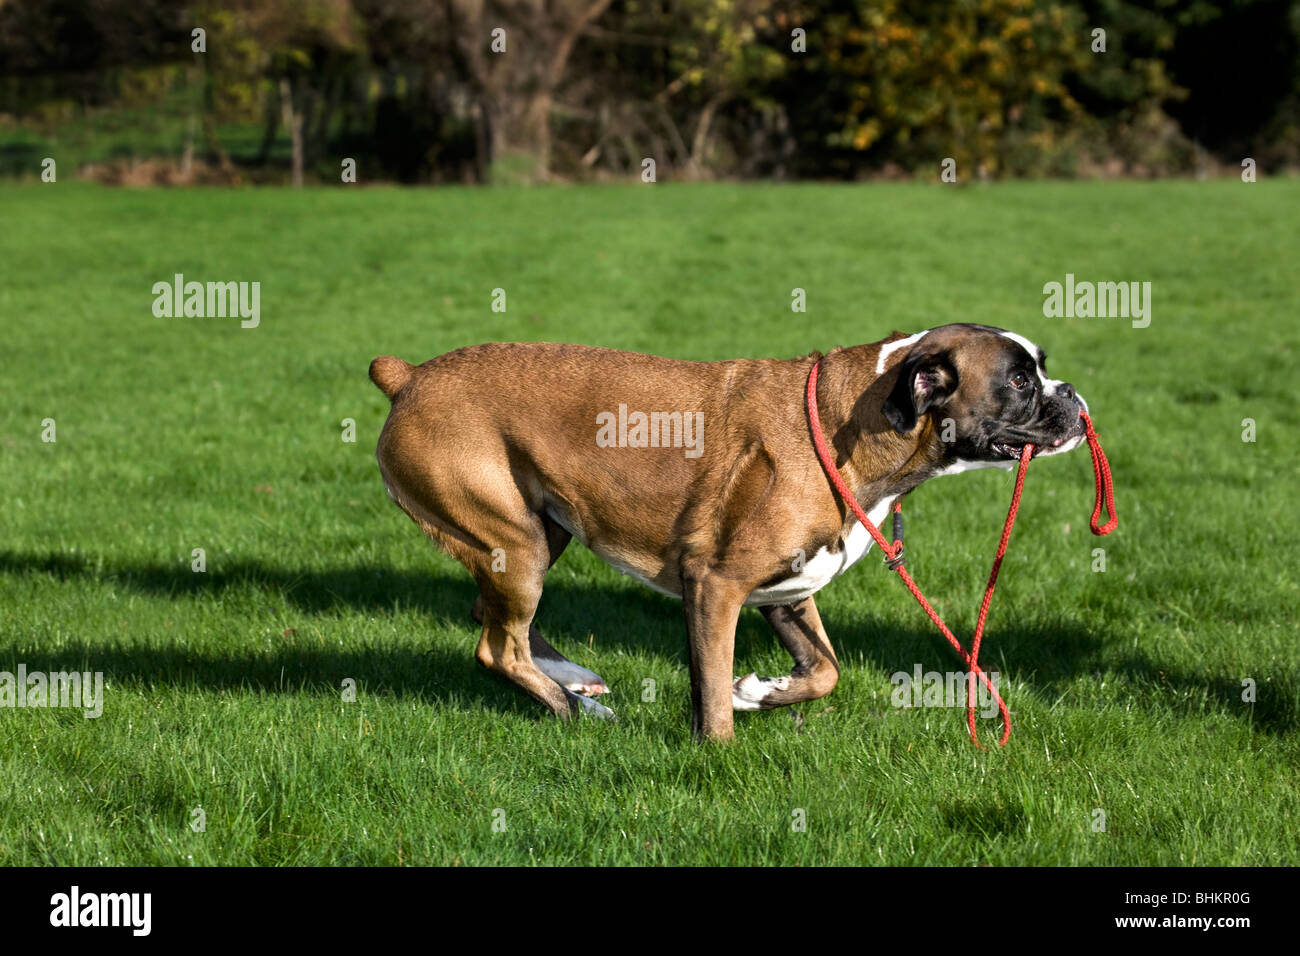 Boxer dog (Canis lupus familiaris) running with leash in mouth in garden Stock Photo